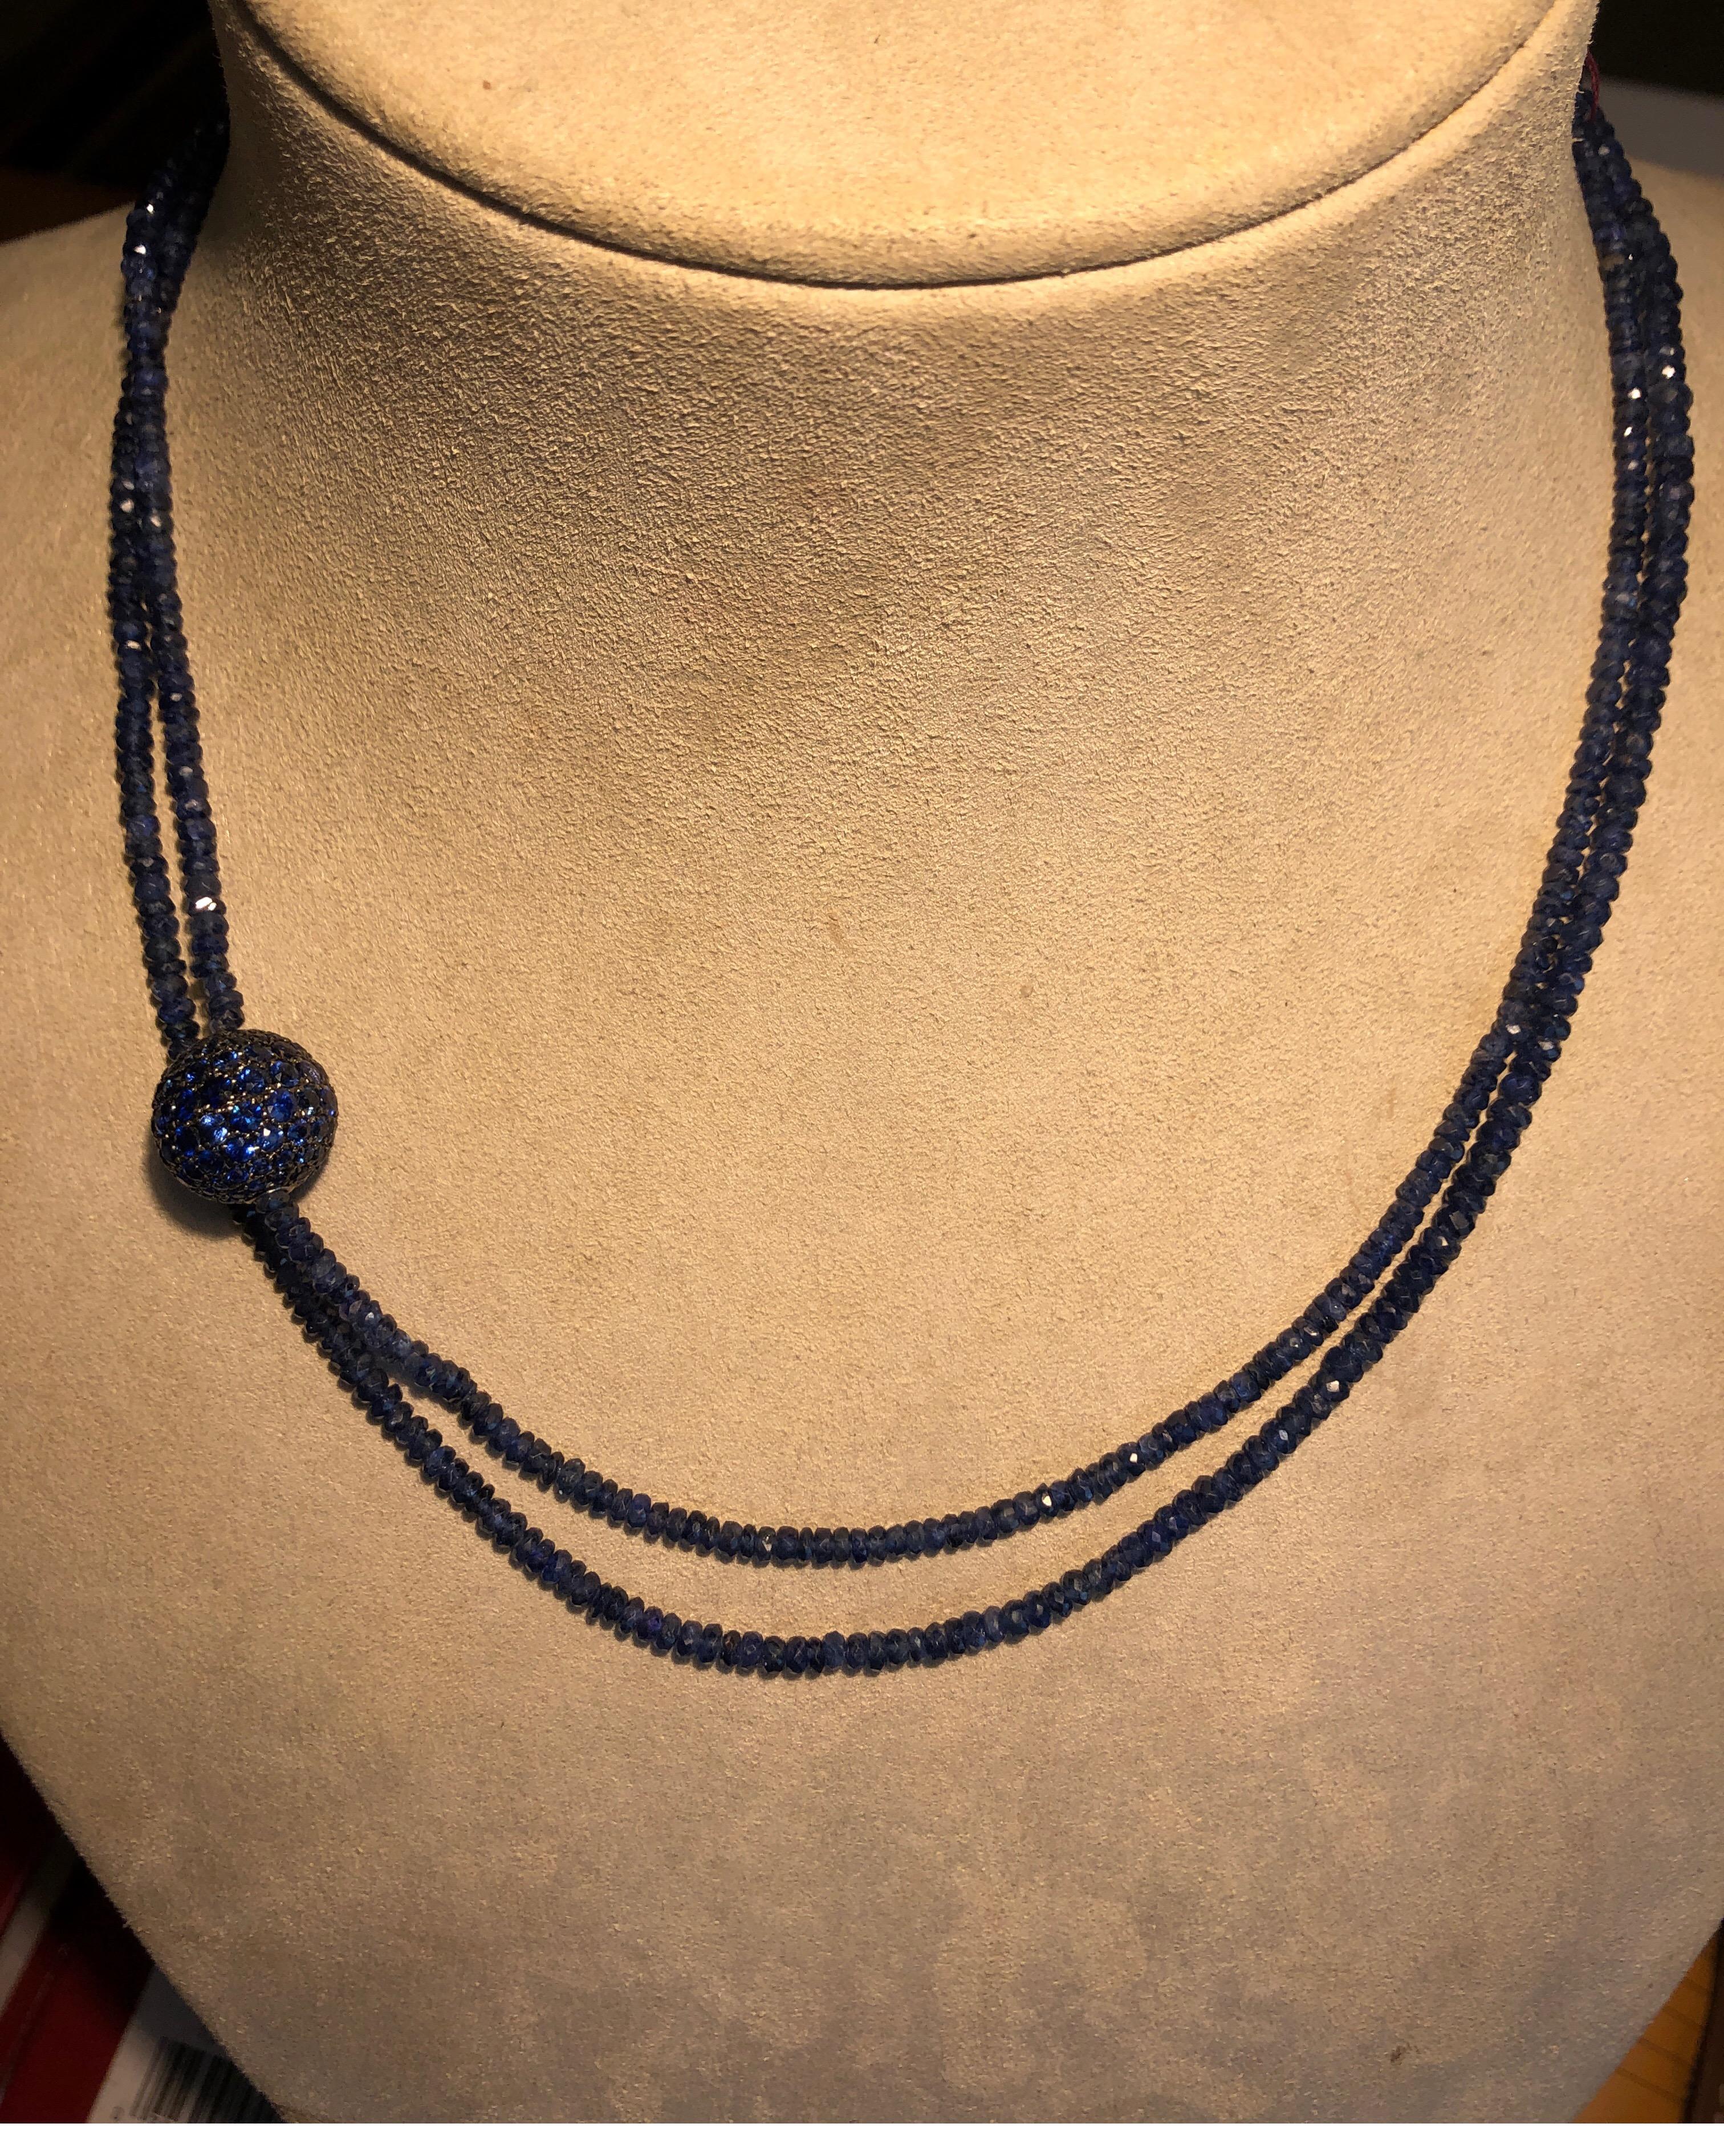 18K white gold necklace with rough blue sapphire beads and blue sapphire decorative 13mm ball, may be worn long or doubled, 38 inches long.
Last retail $8000